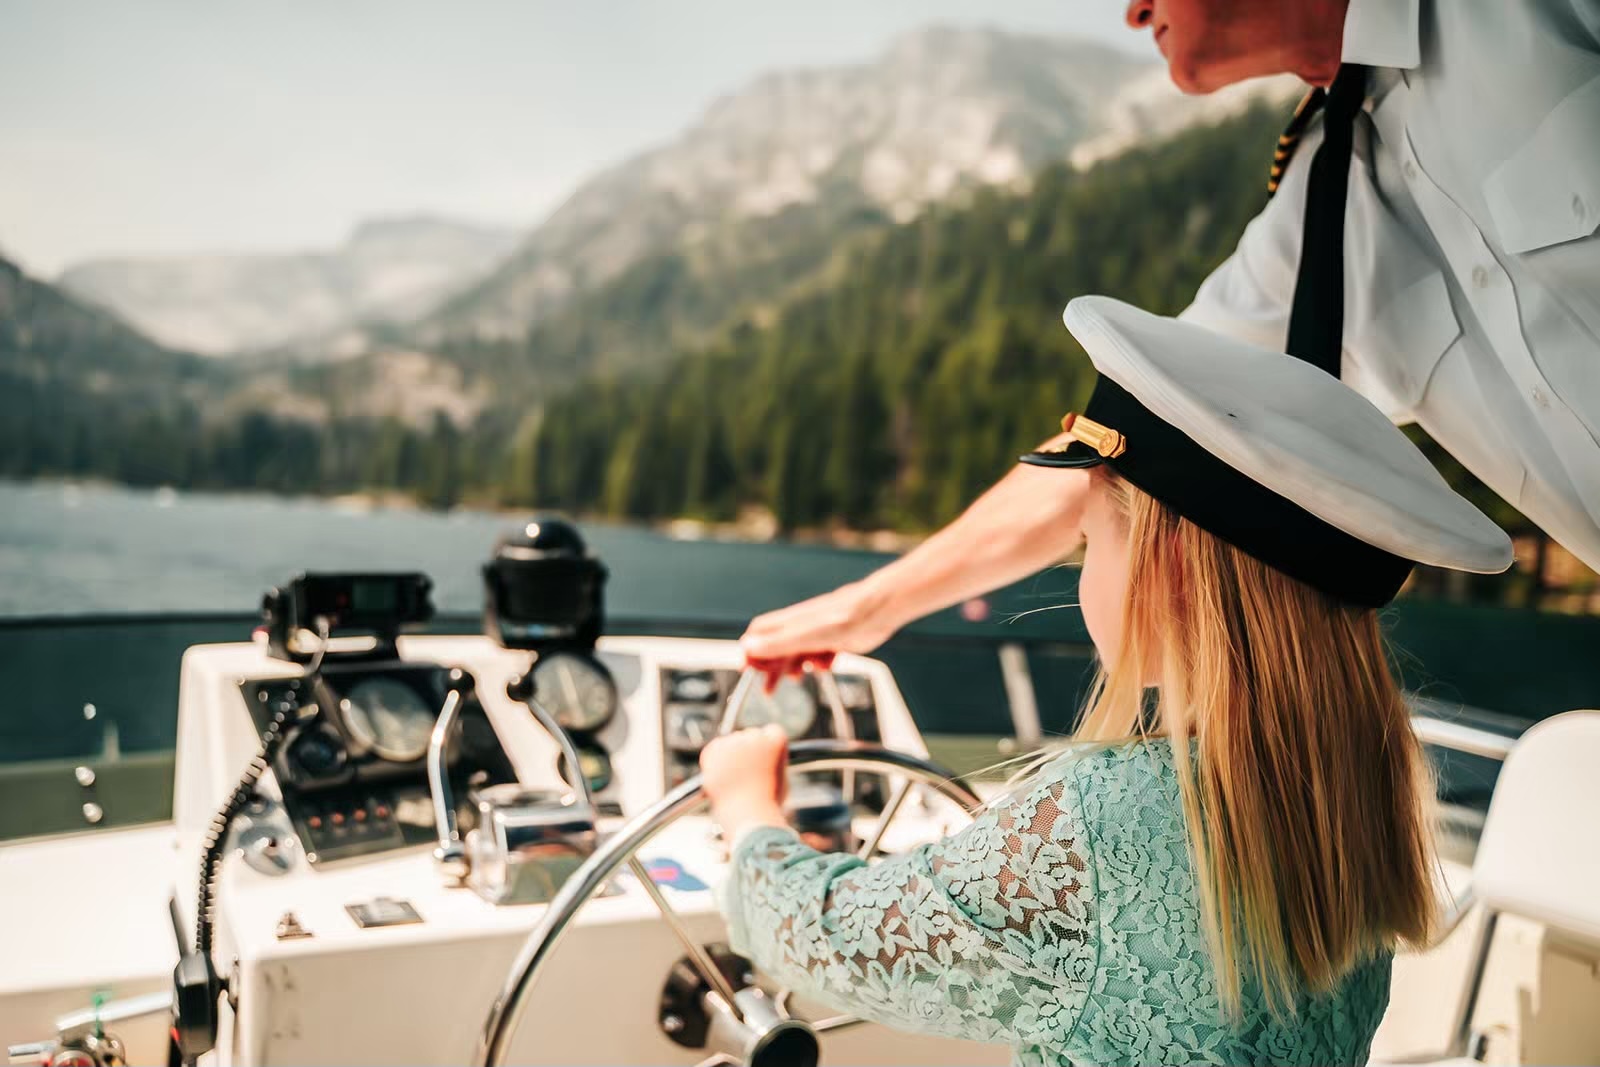 Little girl steers the boat at the Lake Tahoe boat wedding